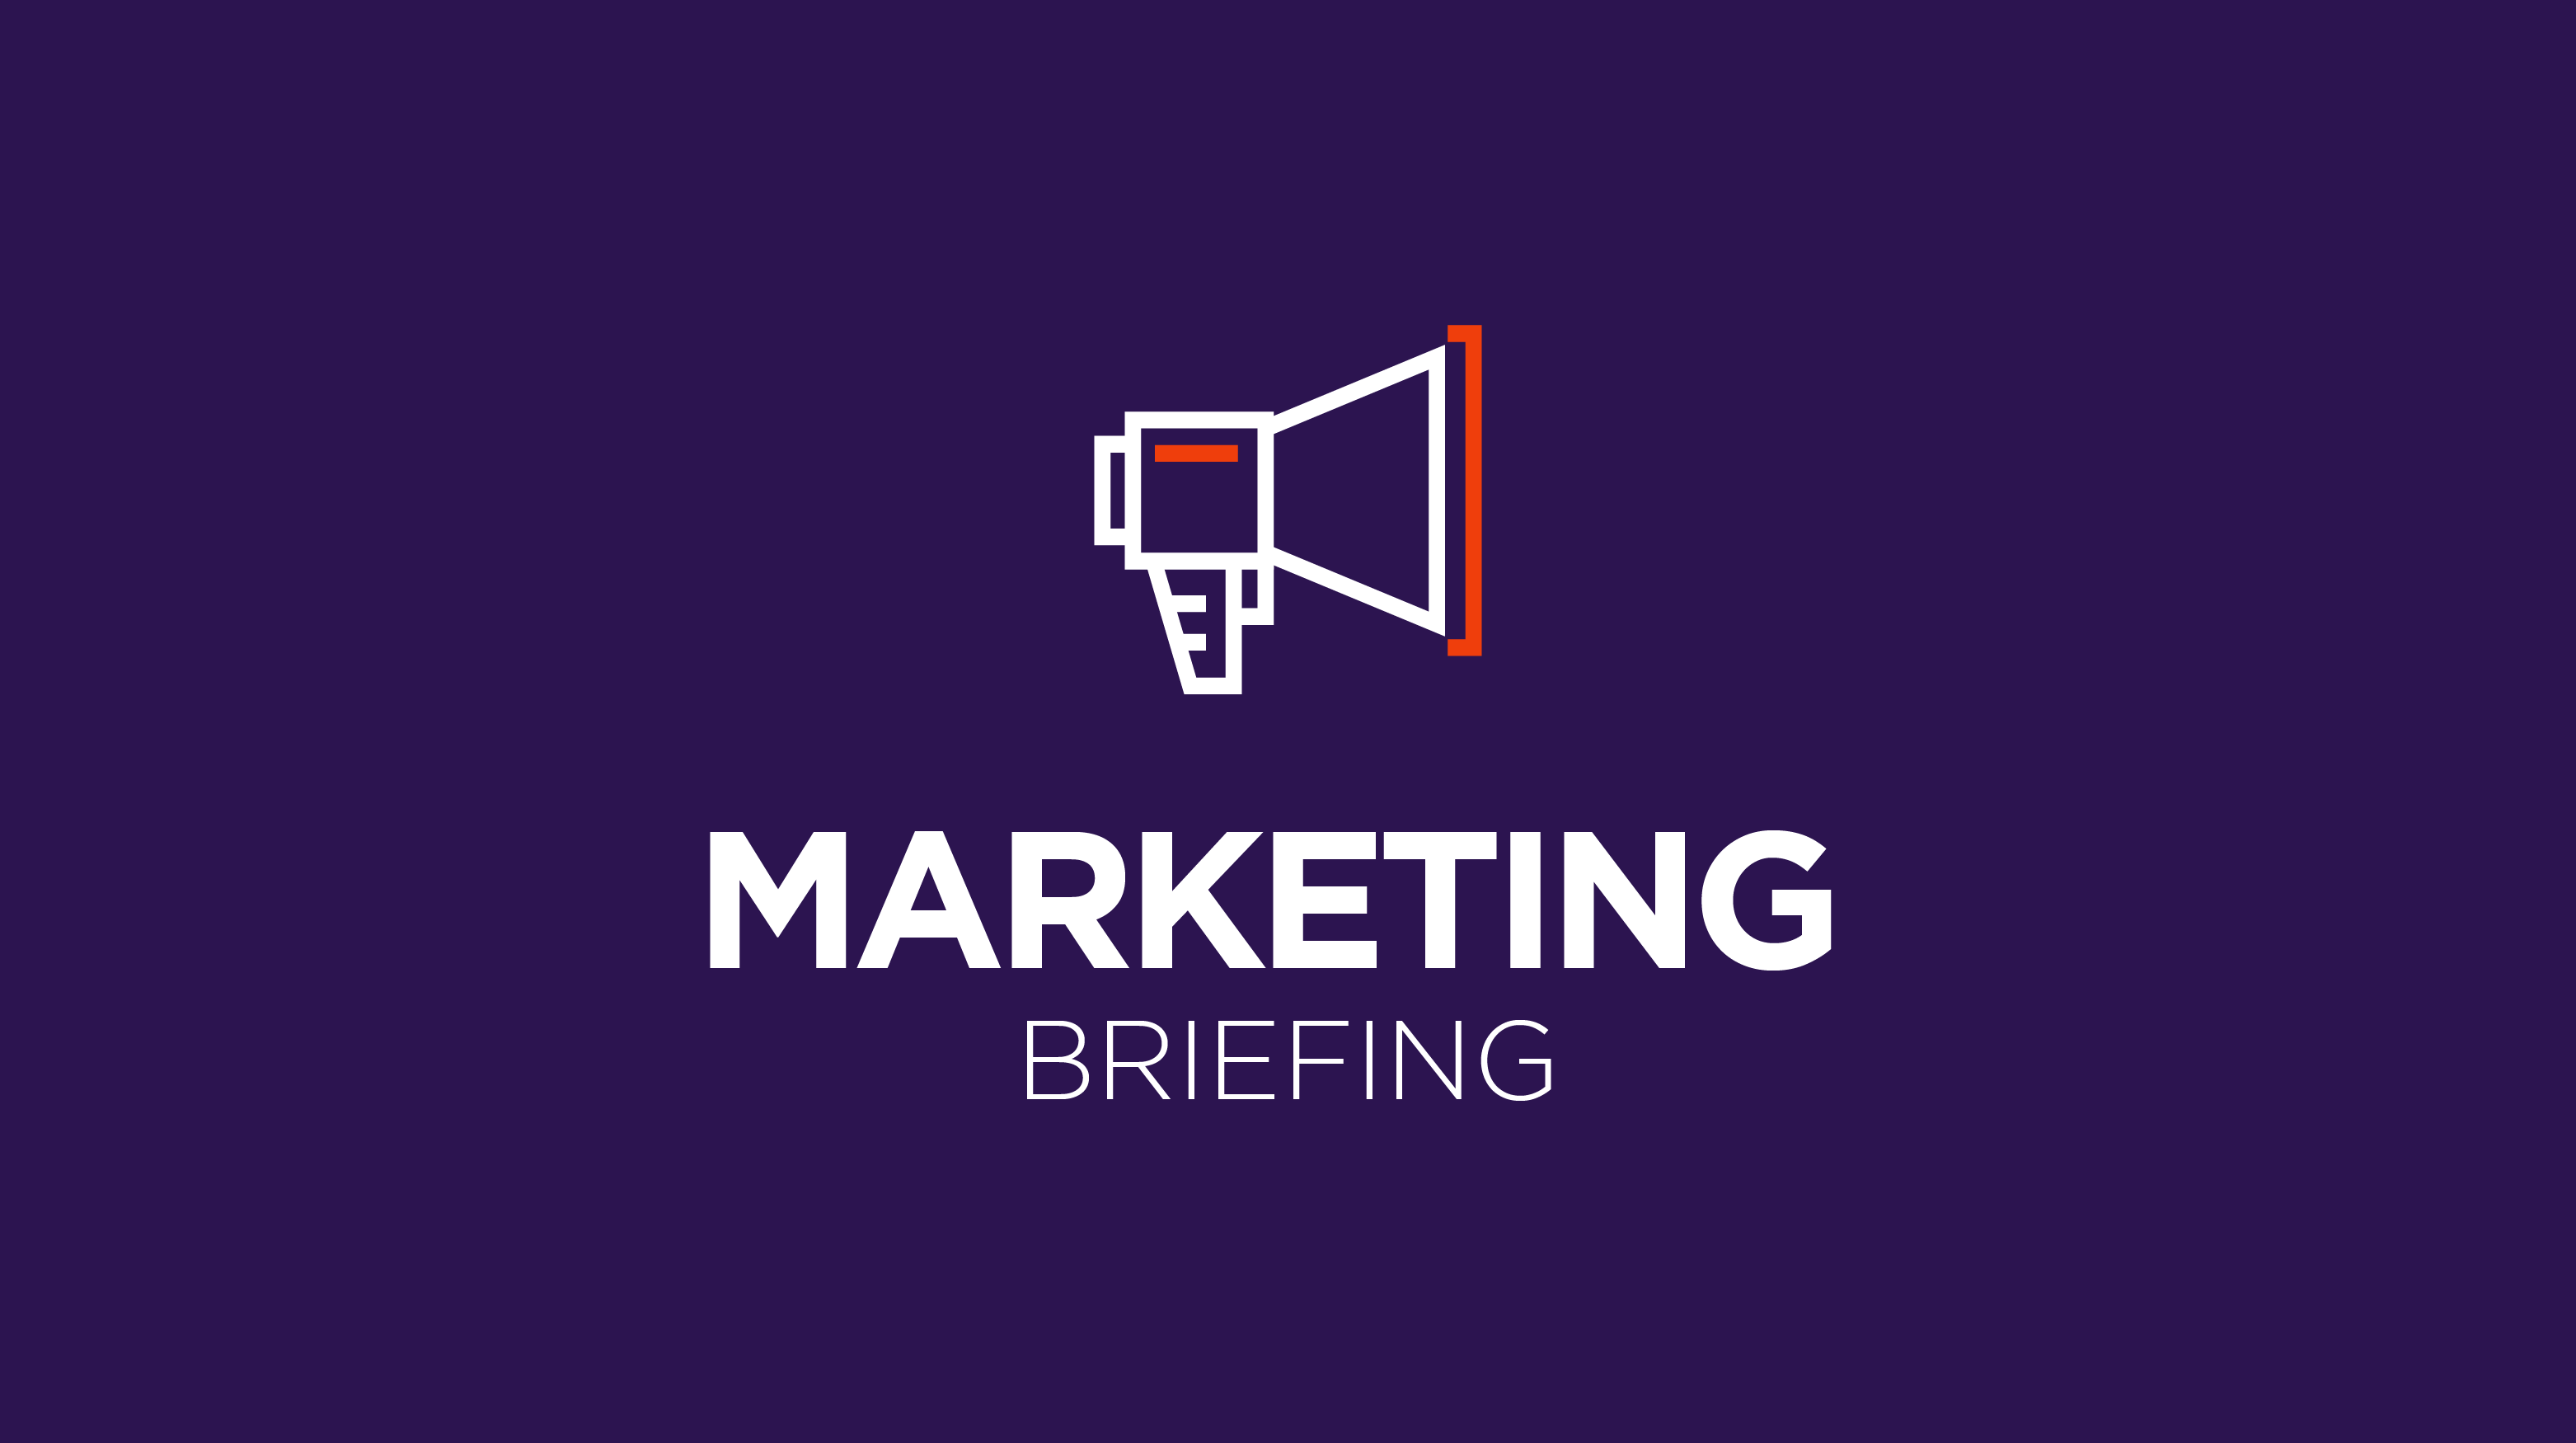 Marketing briefing: How do you market to a business/consumer hybrid?